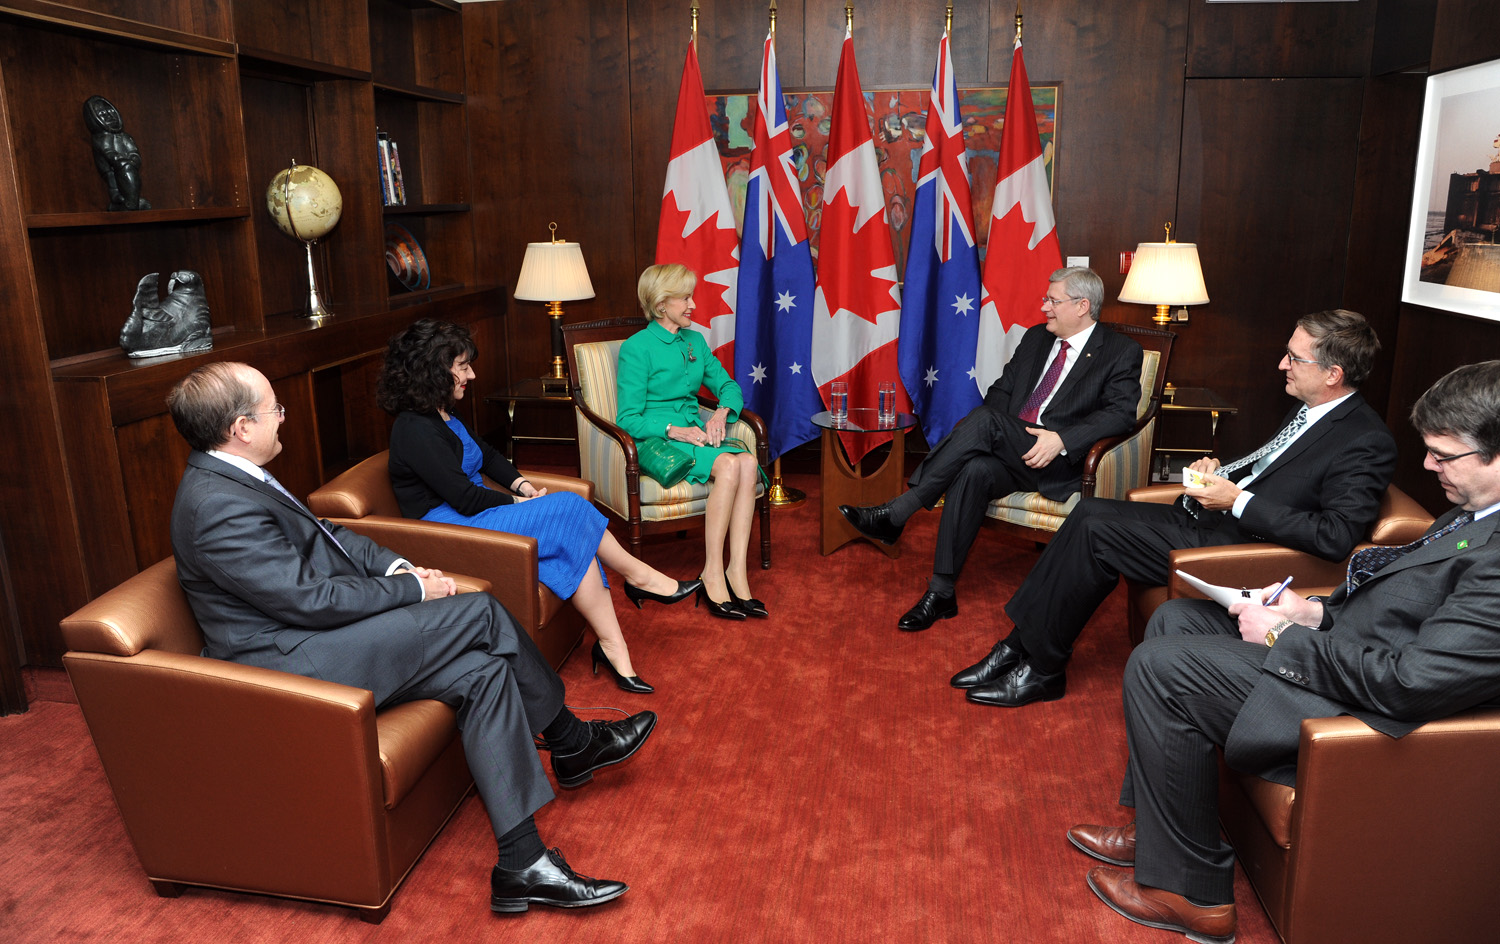 The Governor-General meets the Prime Minister of Canada